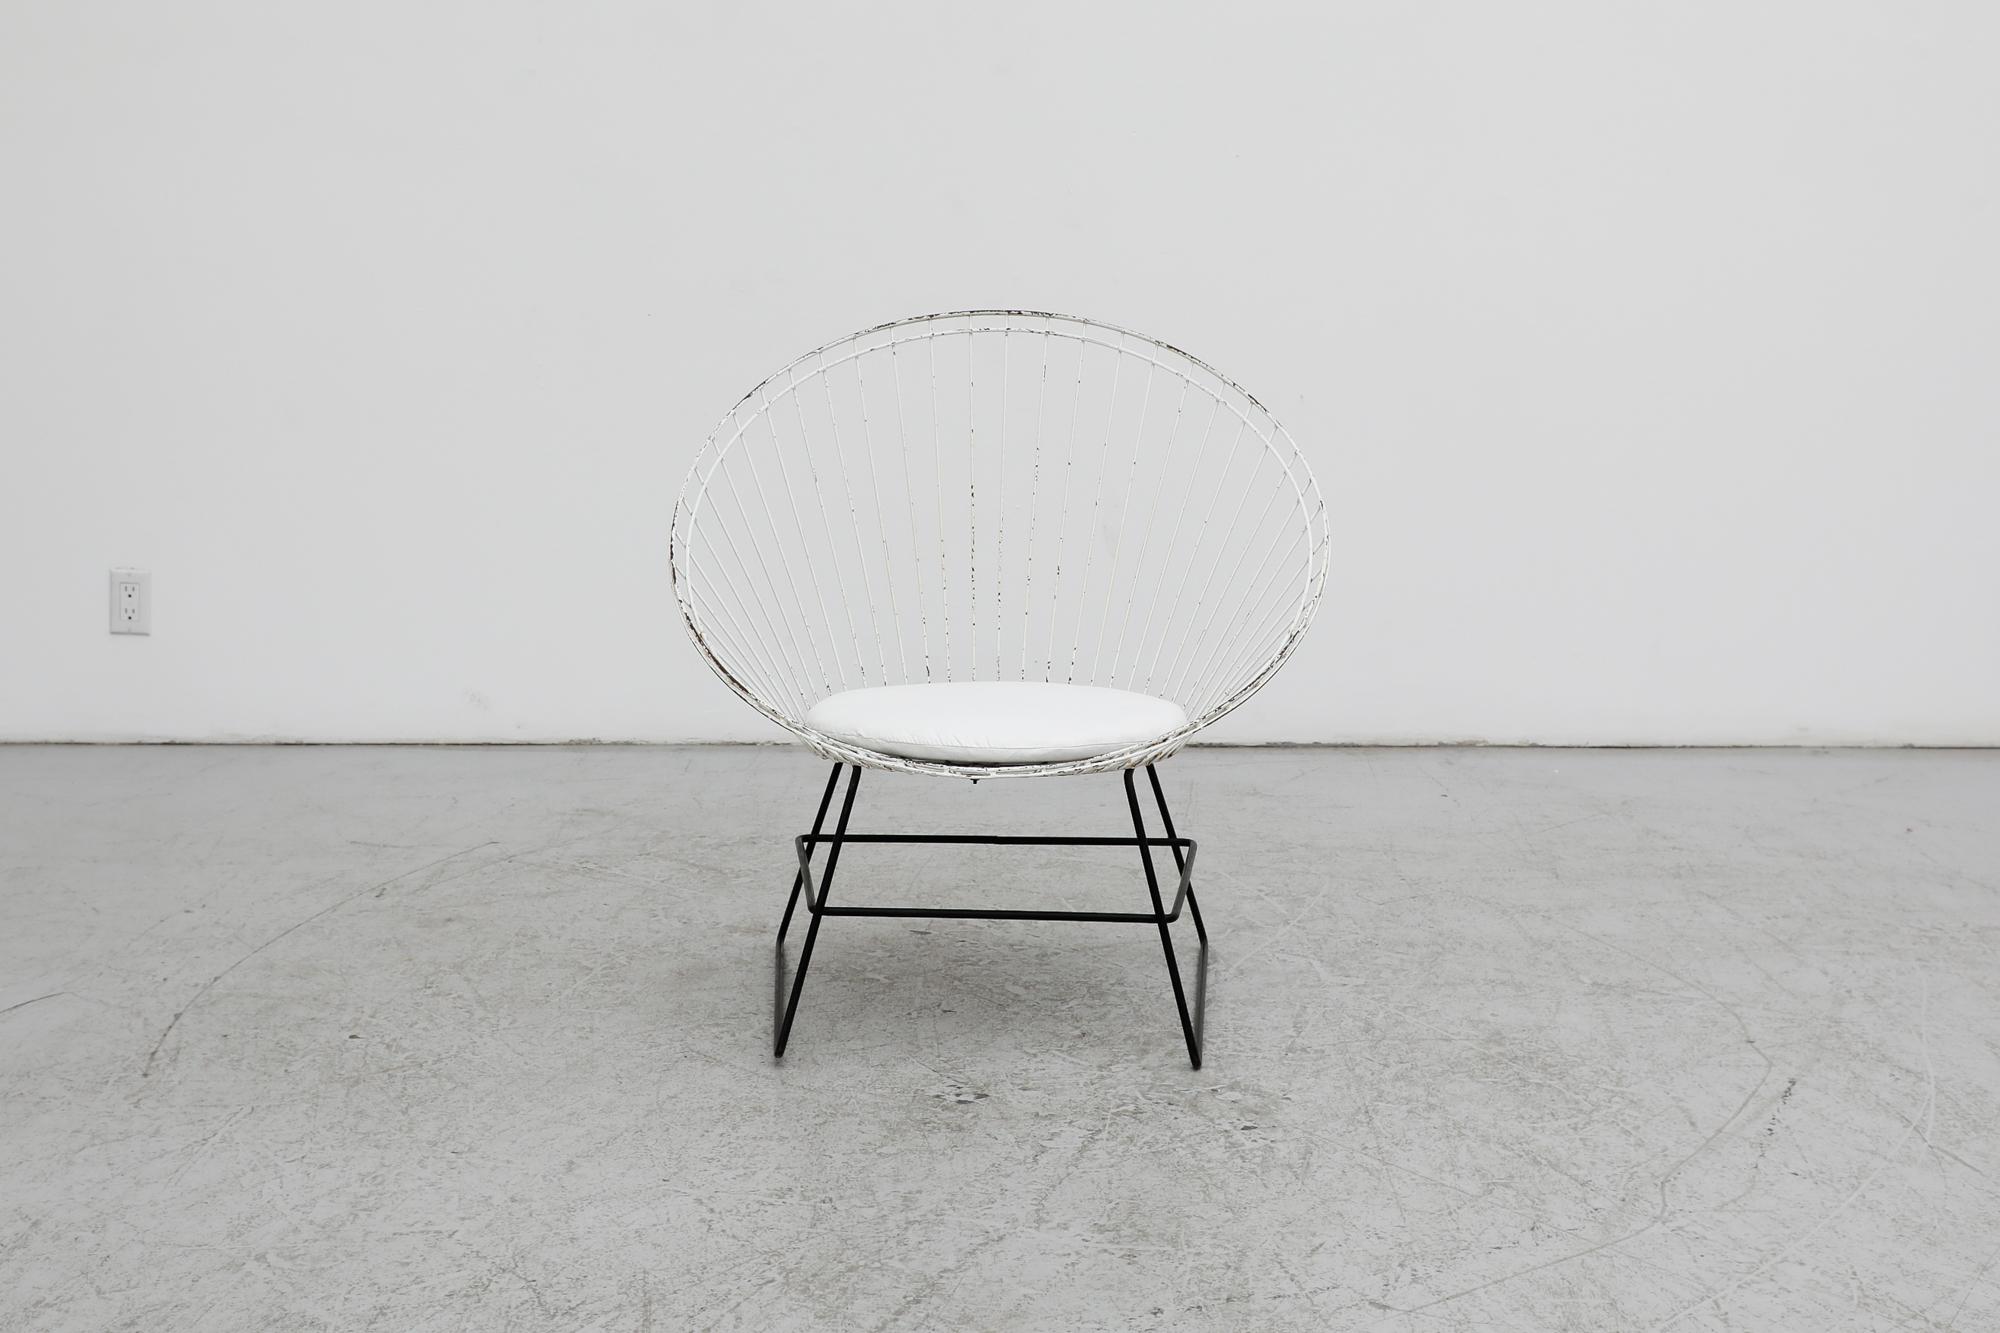 Rare 1958 'Flamingo' chair, designed by Cees Braakman & Adriaan Dekker and manufactured by Tomado for Pastoe. A very rare collaboration that resulted in a one of a kind, truly gorgeous piece. This chair has black legs,  a white hoop frame and newly